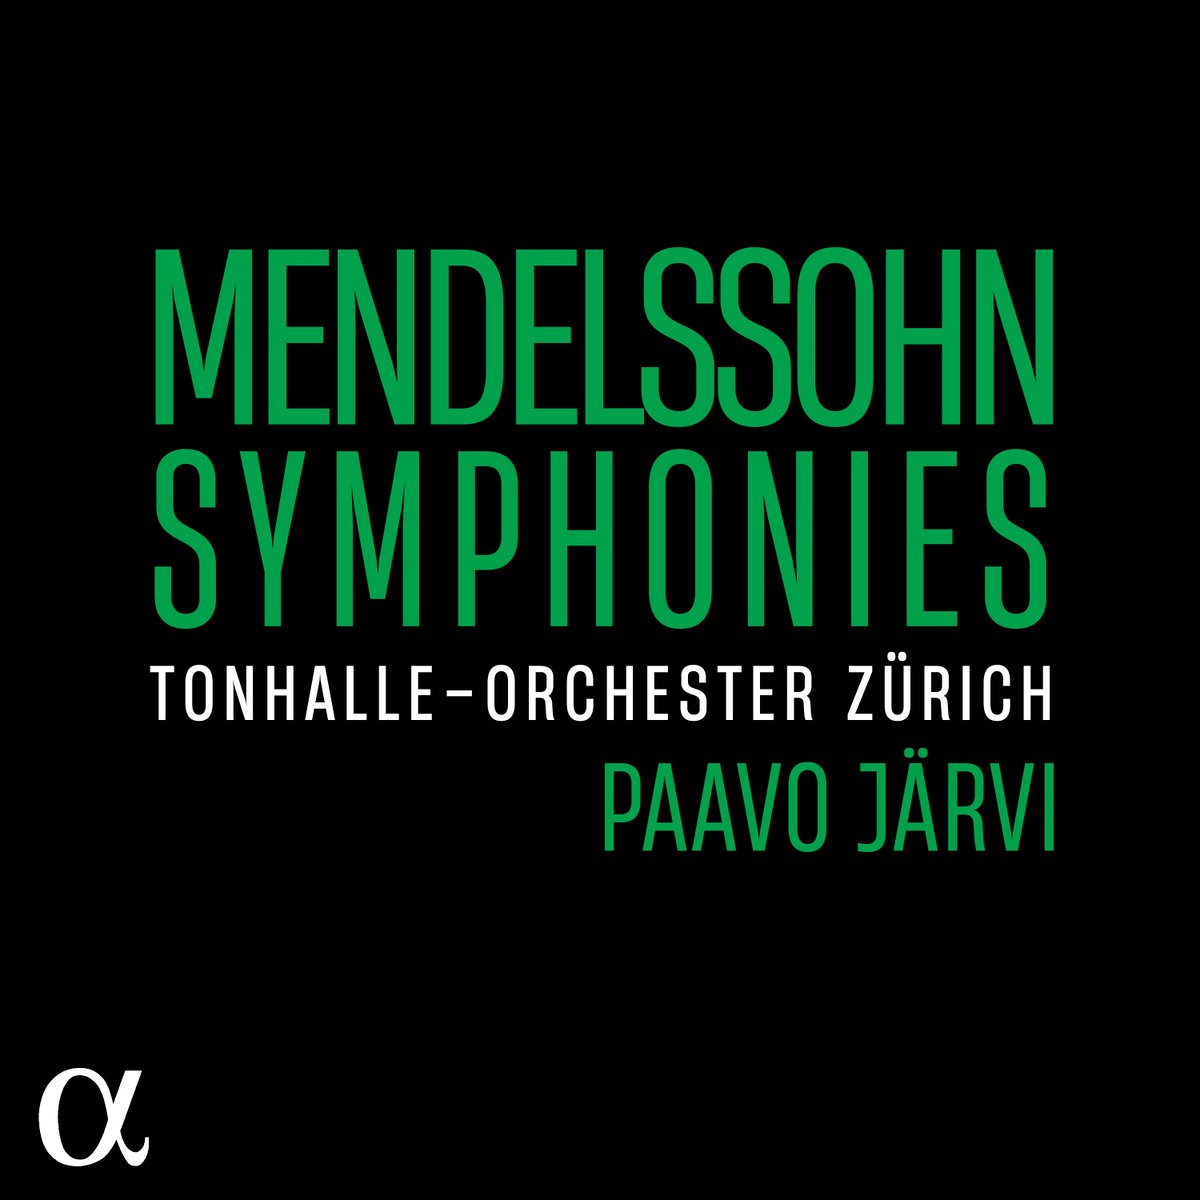 Release Day! Presto's Classical Recording Of The Week is Mendelssohn: Symphonies on Alpha 'With such committed playing as this, I for one am very grateful that he has directed his focus towards these pieces.' prestomusic.com/classical/prod… @PrestoMusicCom @alpha_classics @paavo_jarvi